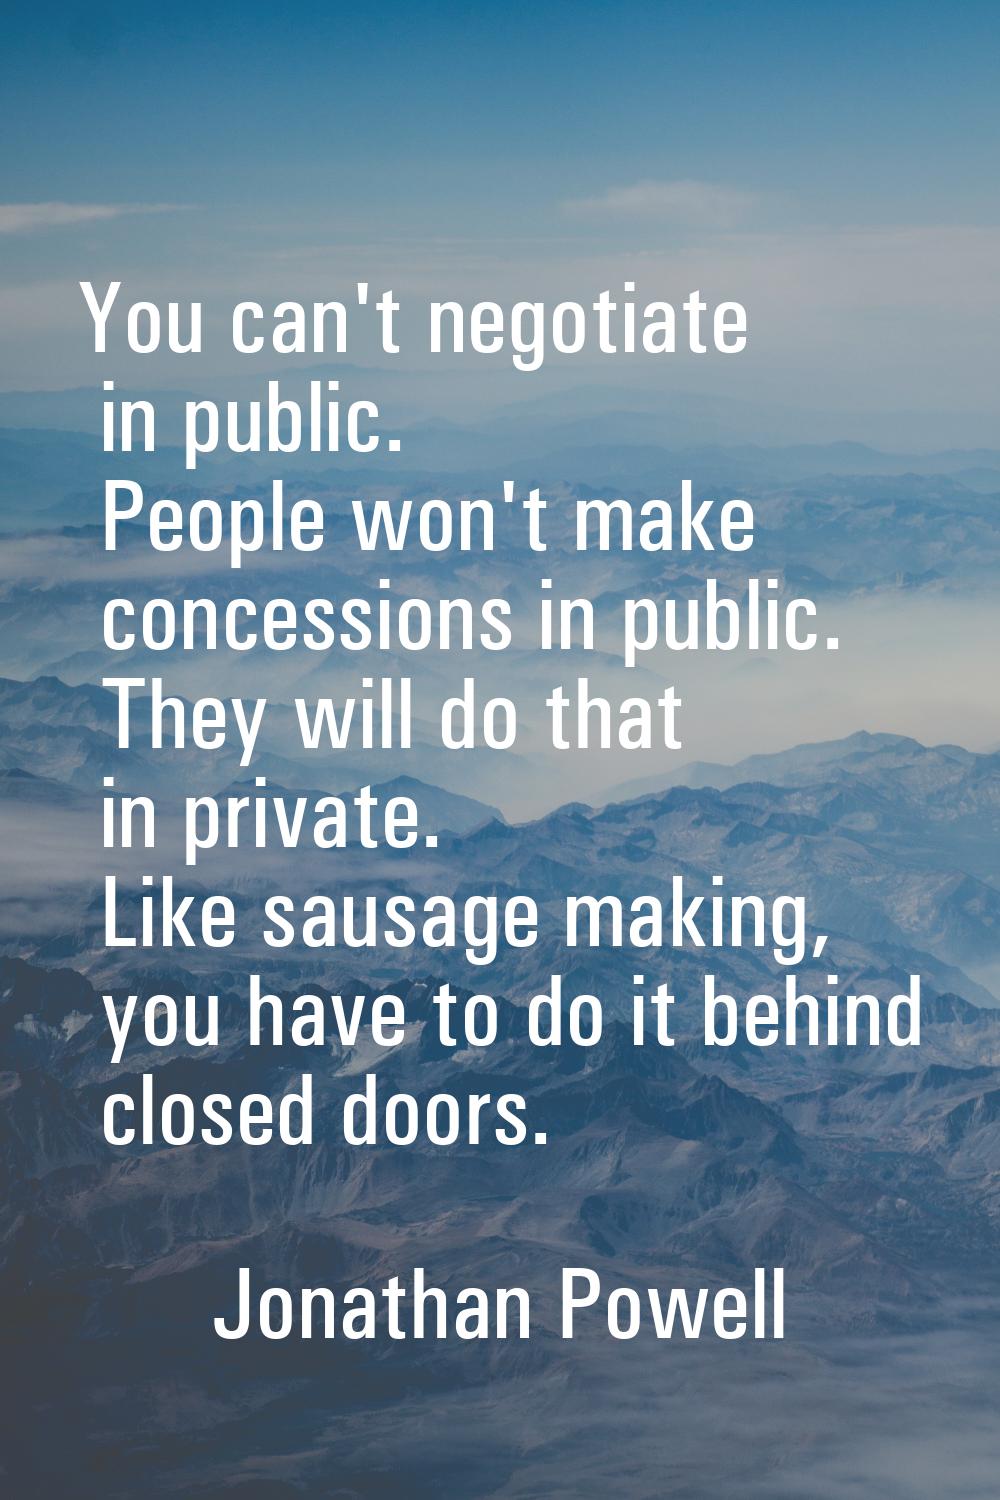 You can't negotiate in public. People won't make concessions in public. They will do that in privat